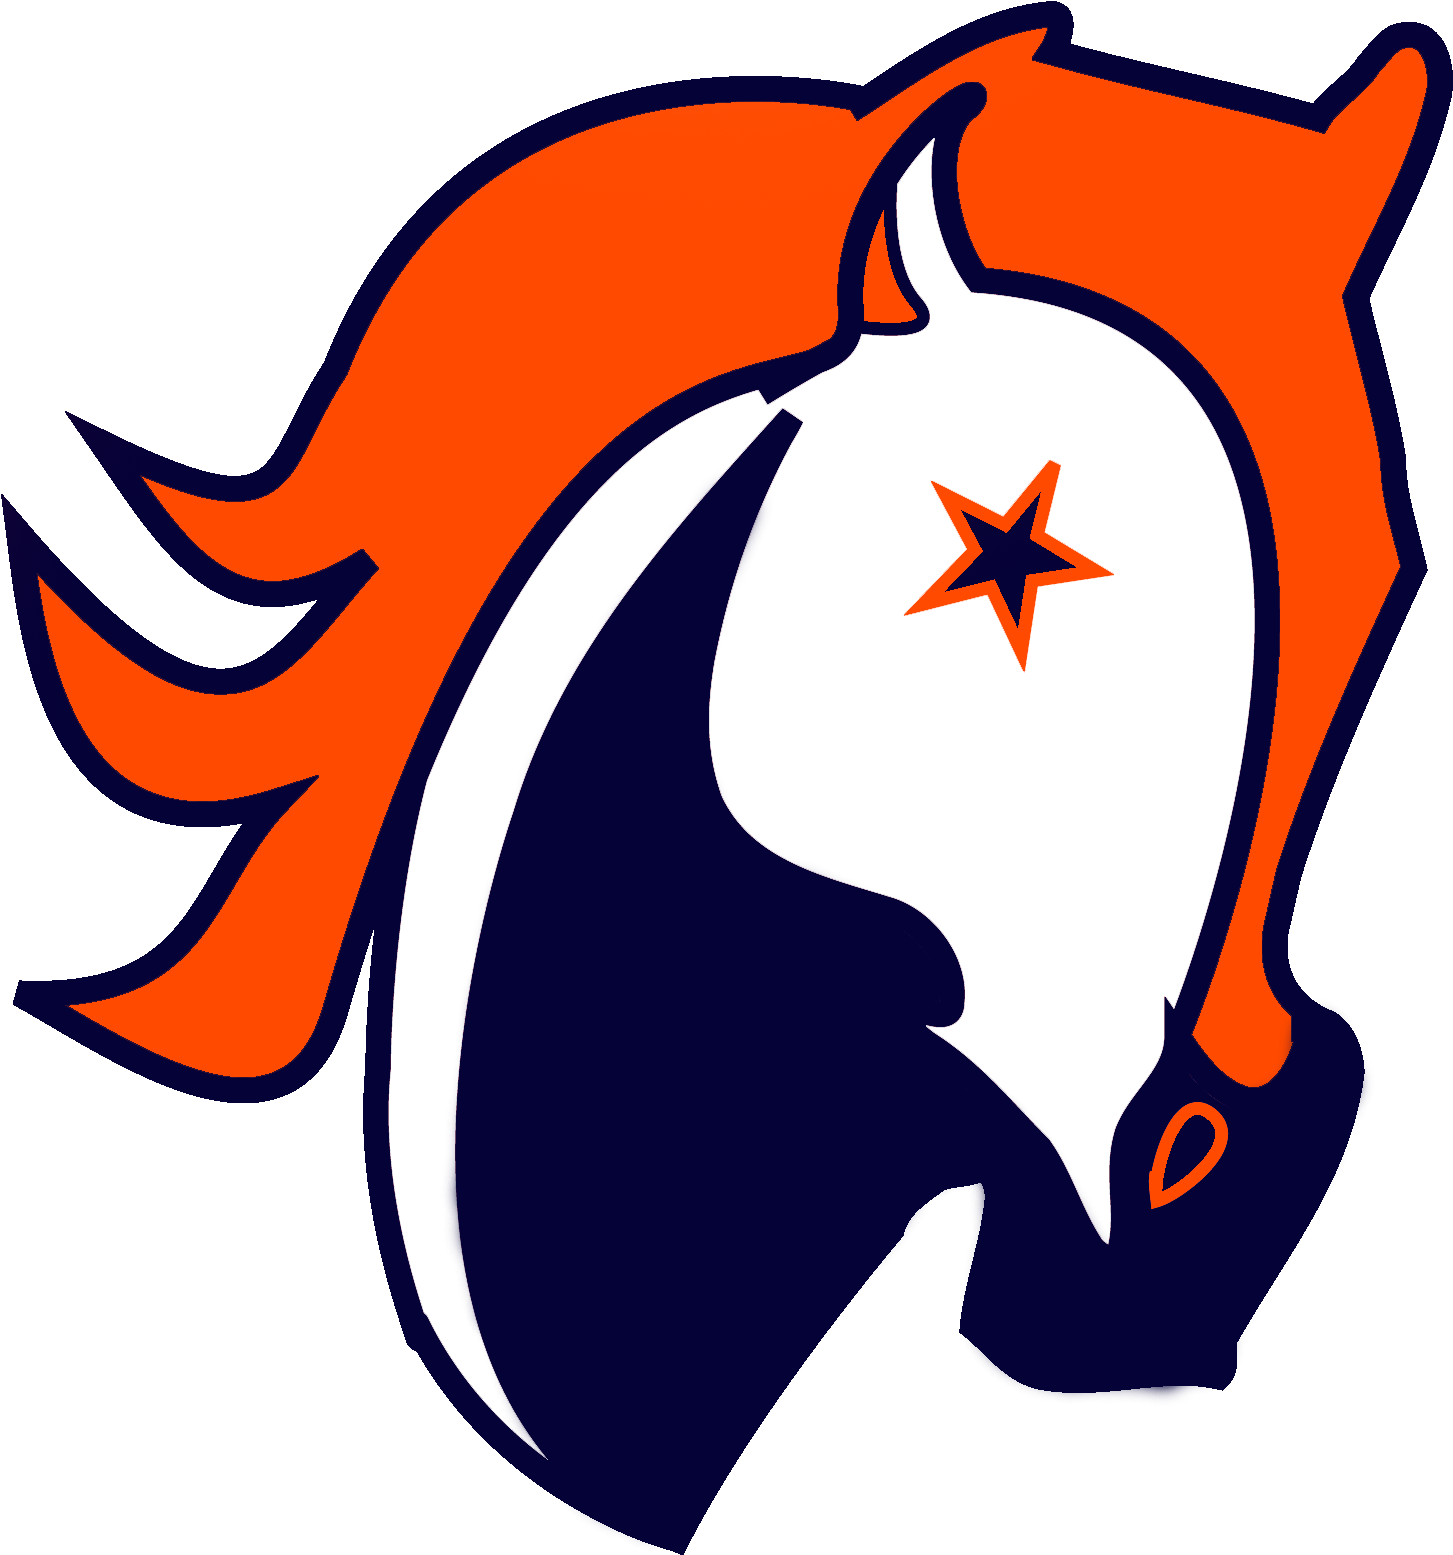 Horse1 - Horse For Sports Logo (1560x1633)